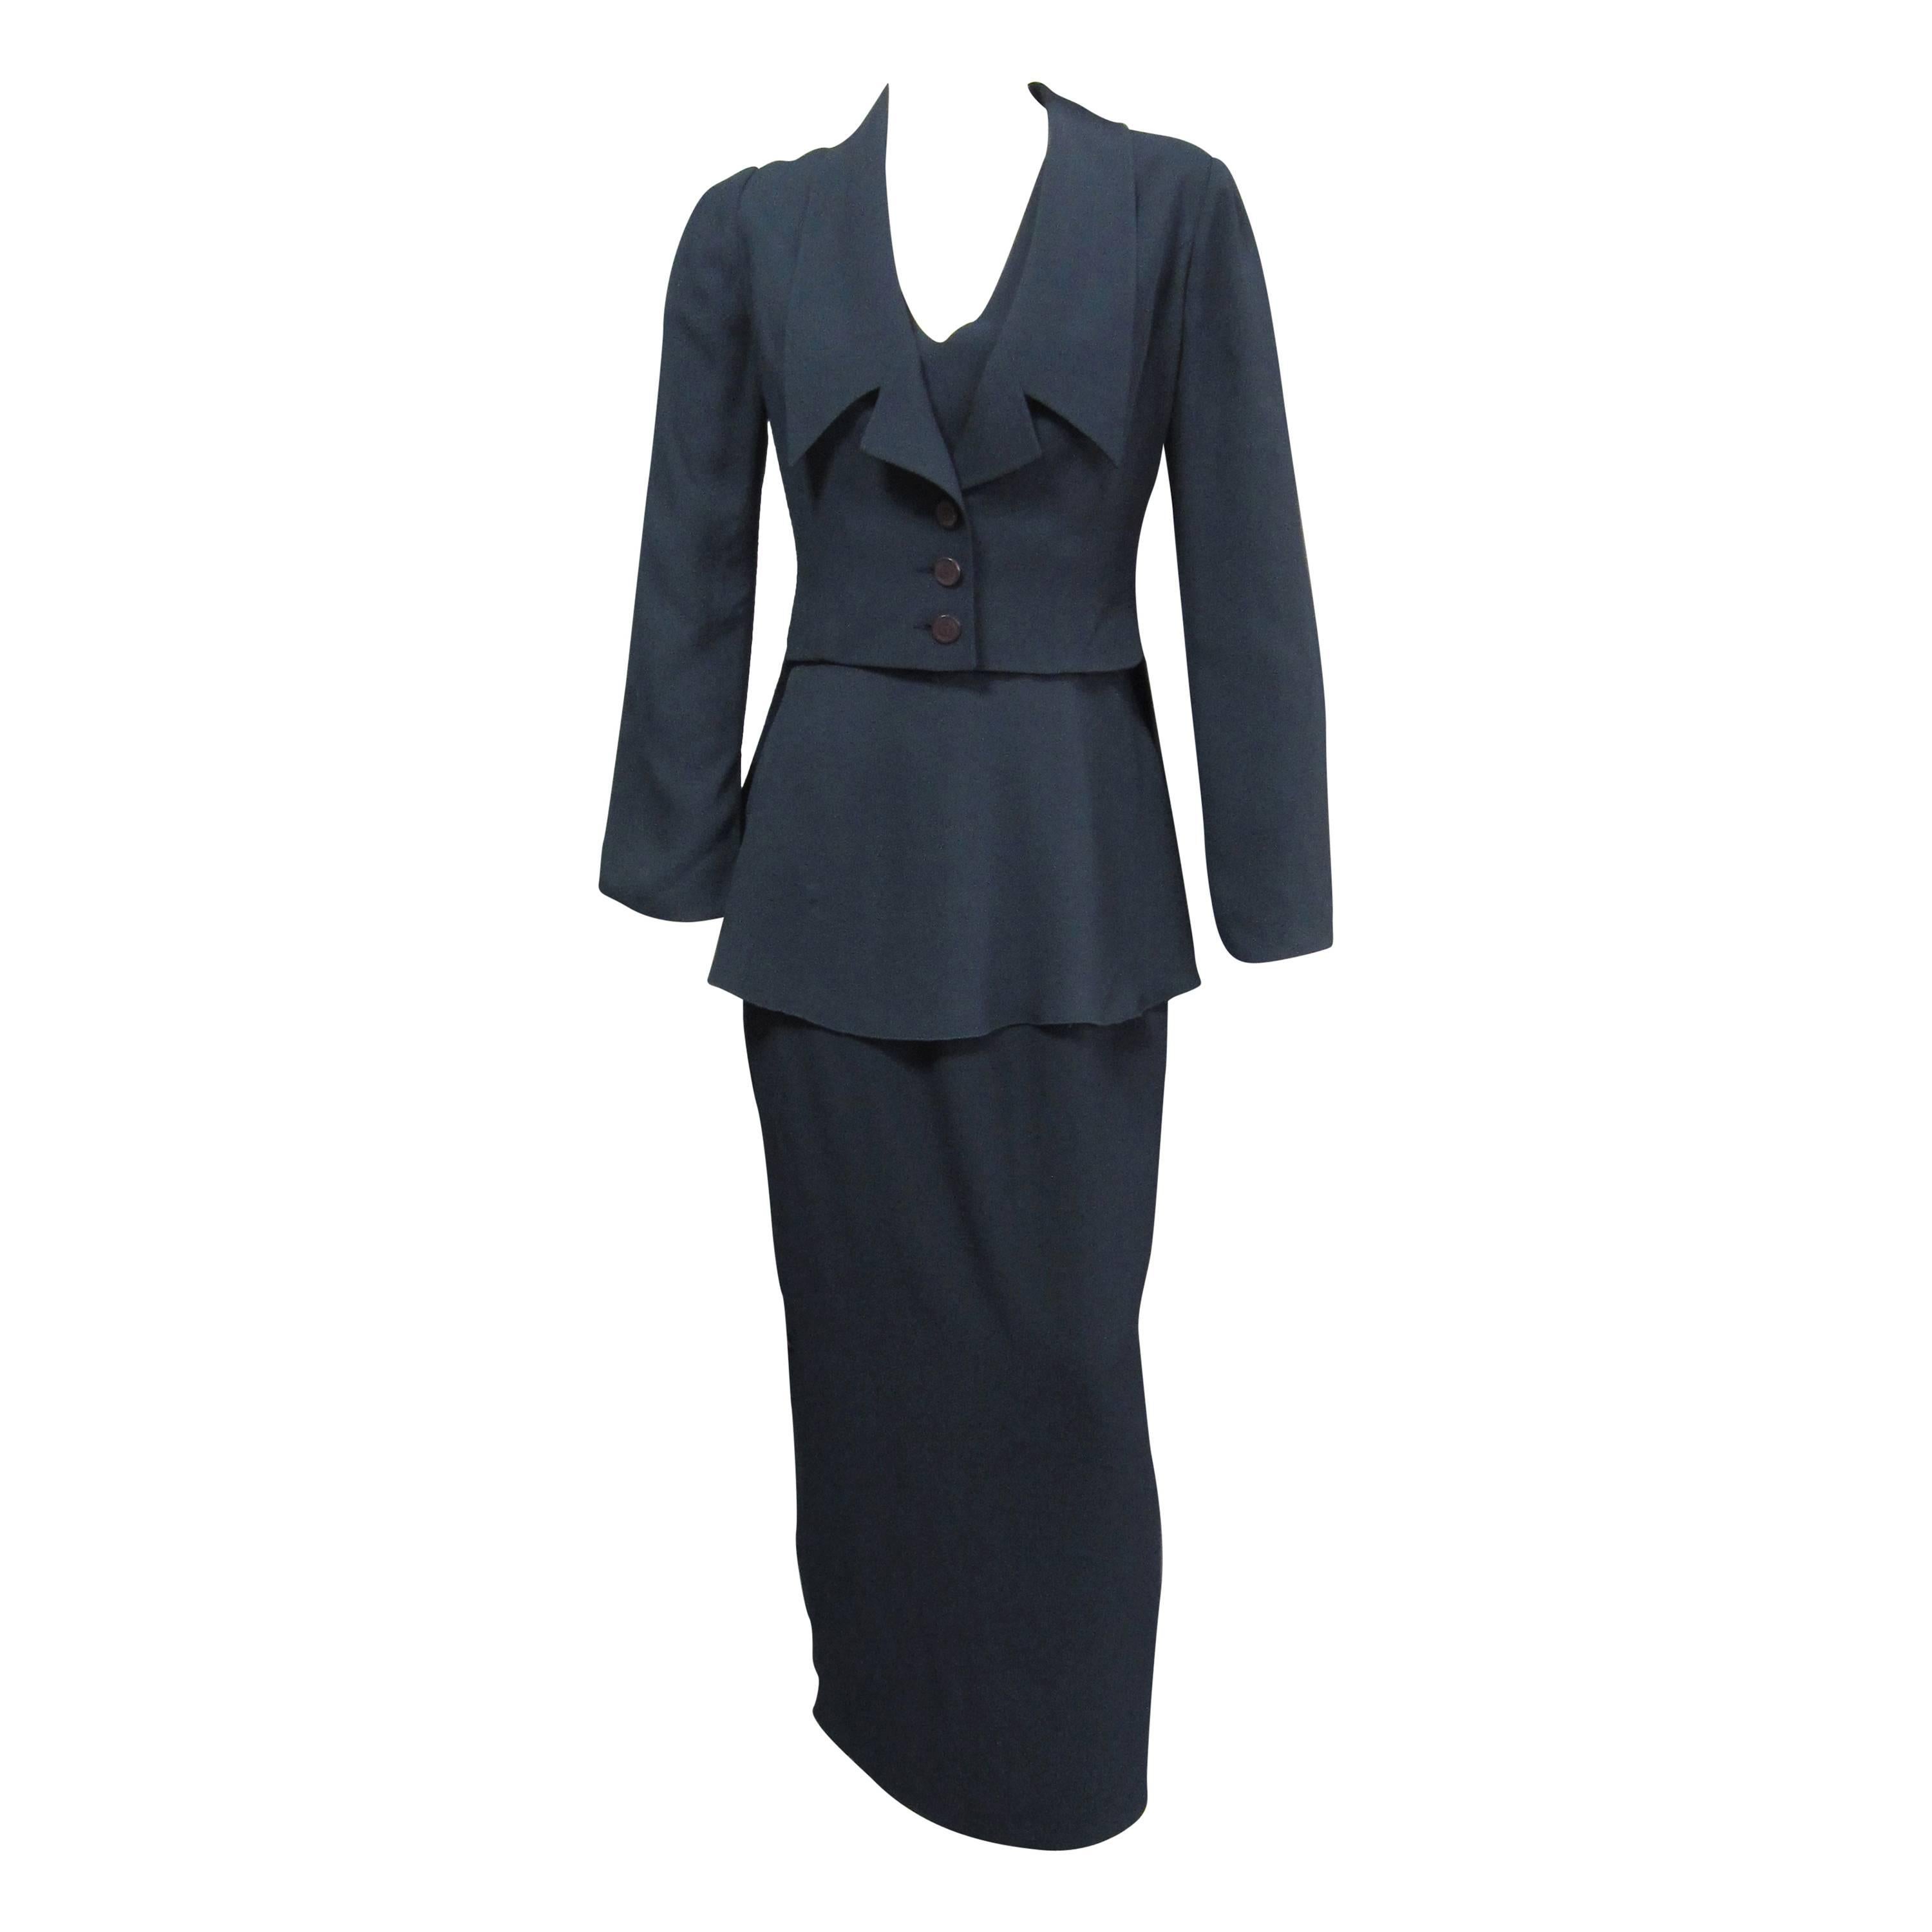 CHLOE 3 piece Ensemble with Jacket, Top & Skirt with Button Detail For Sale